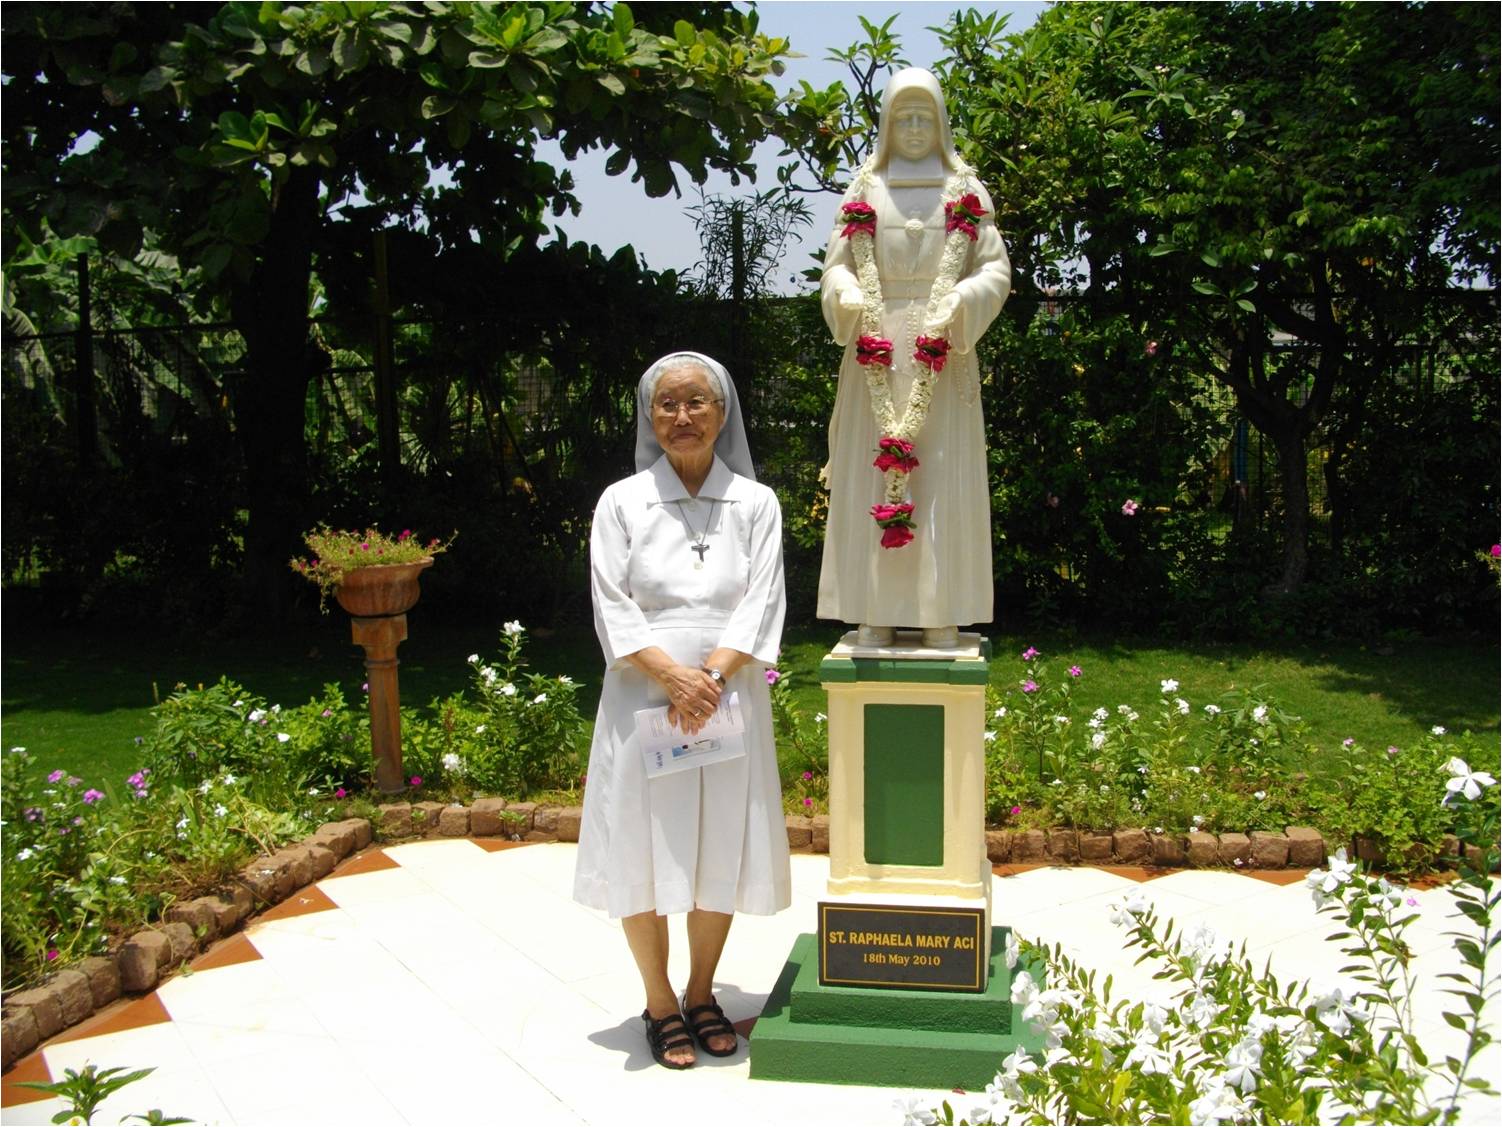 Story of Japanese nun in India captures the heart of a missionary